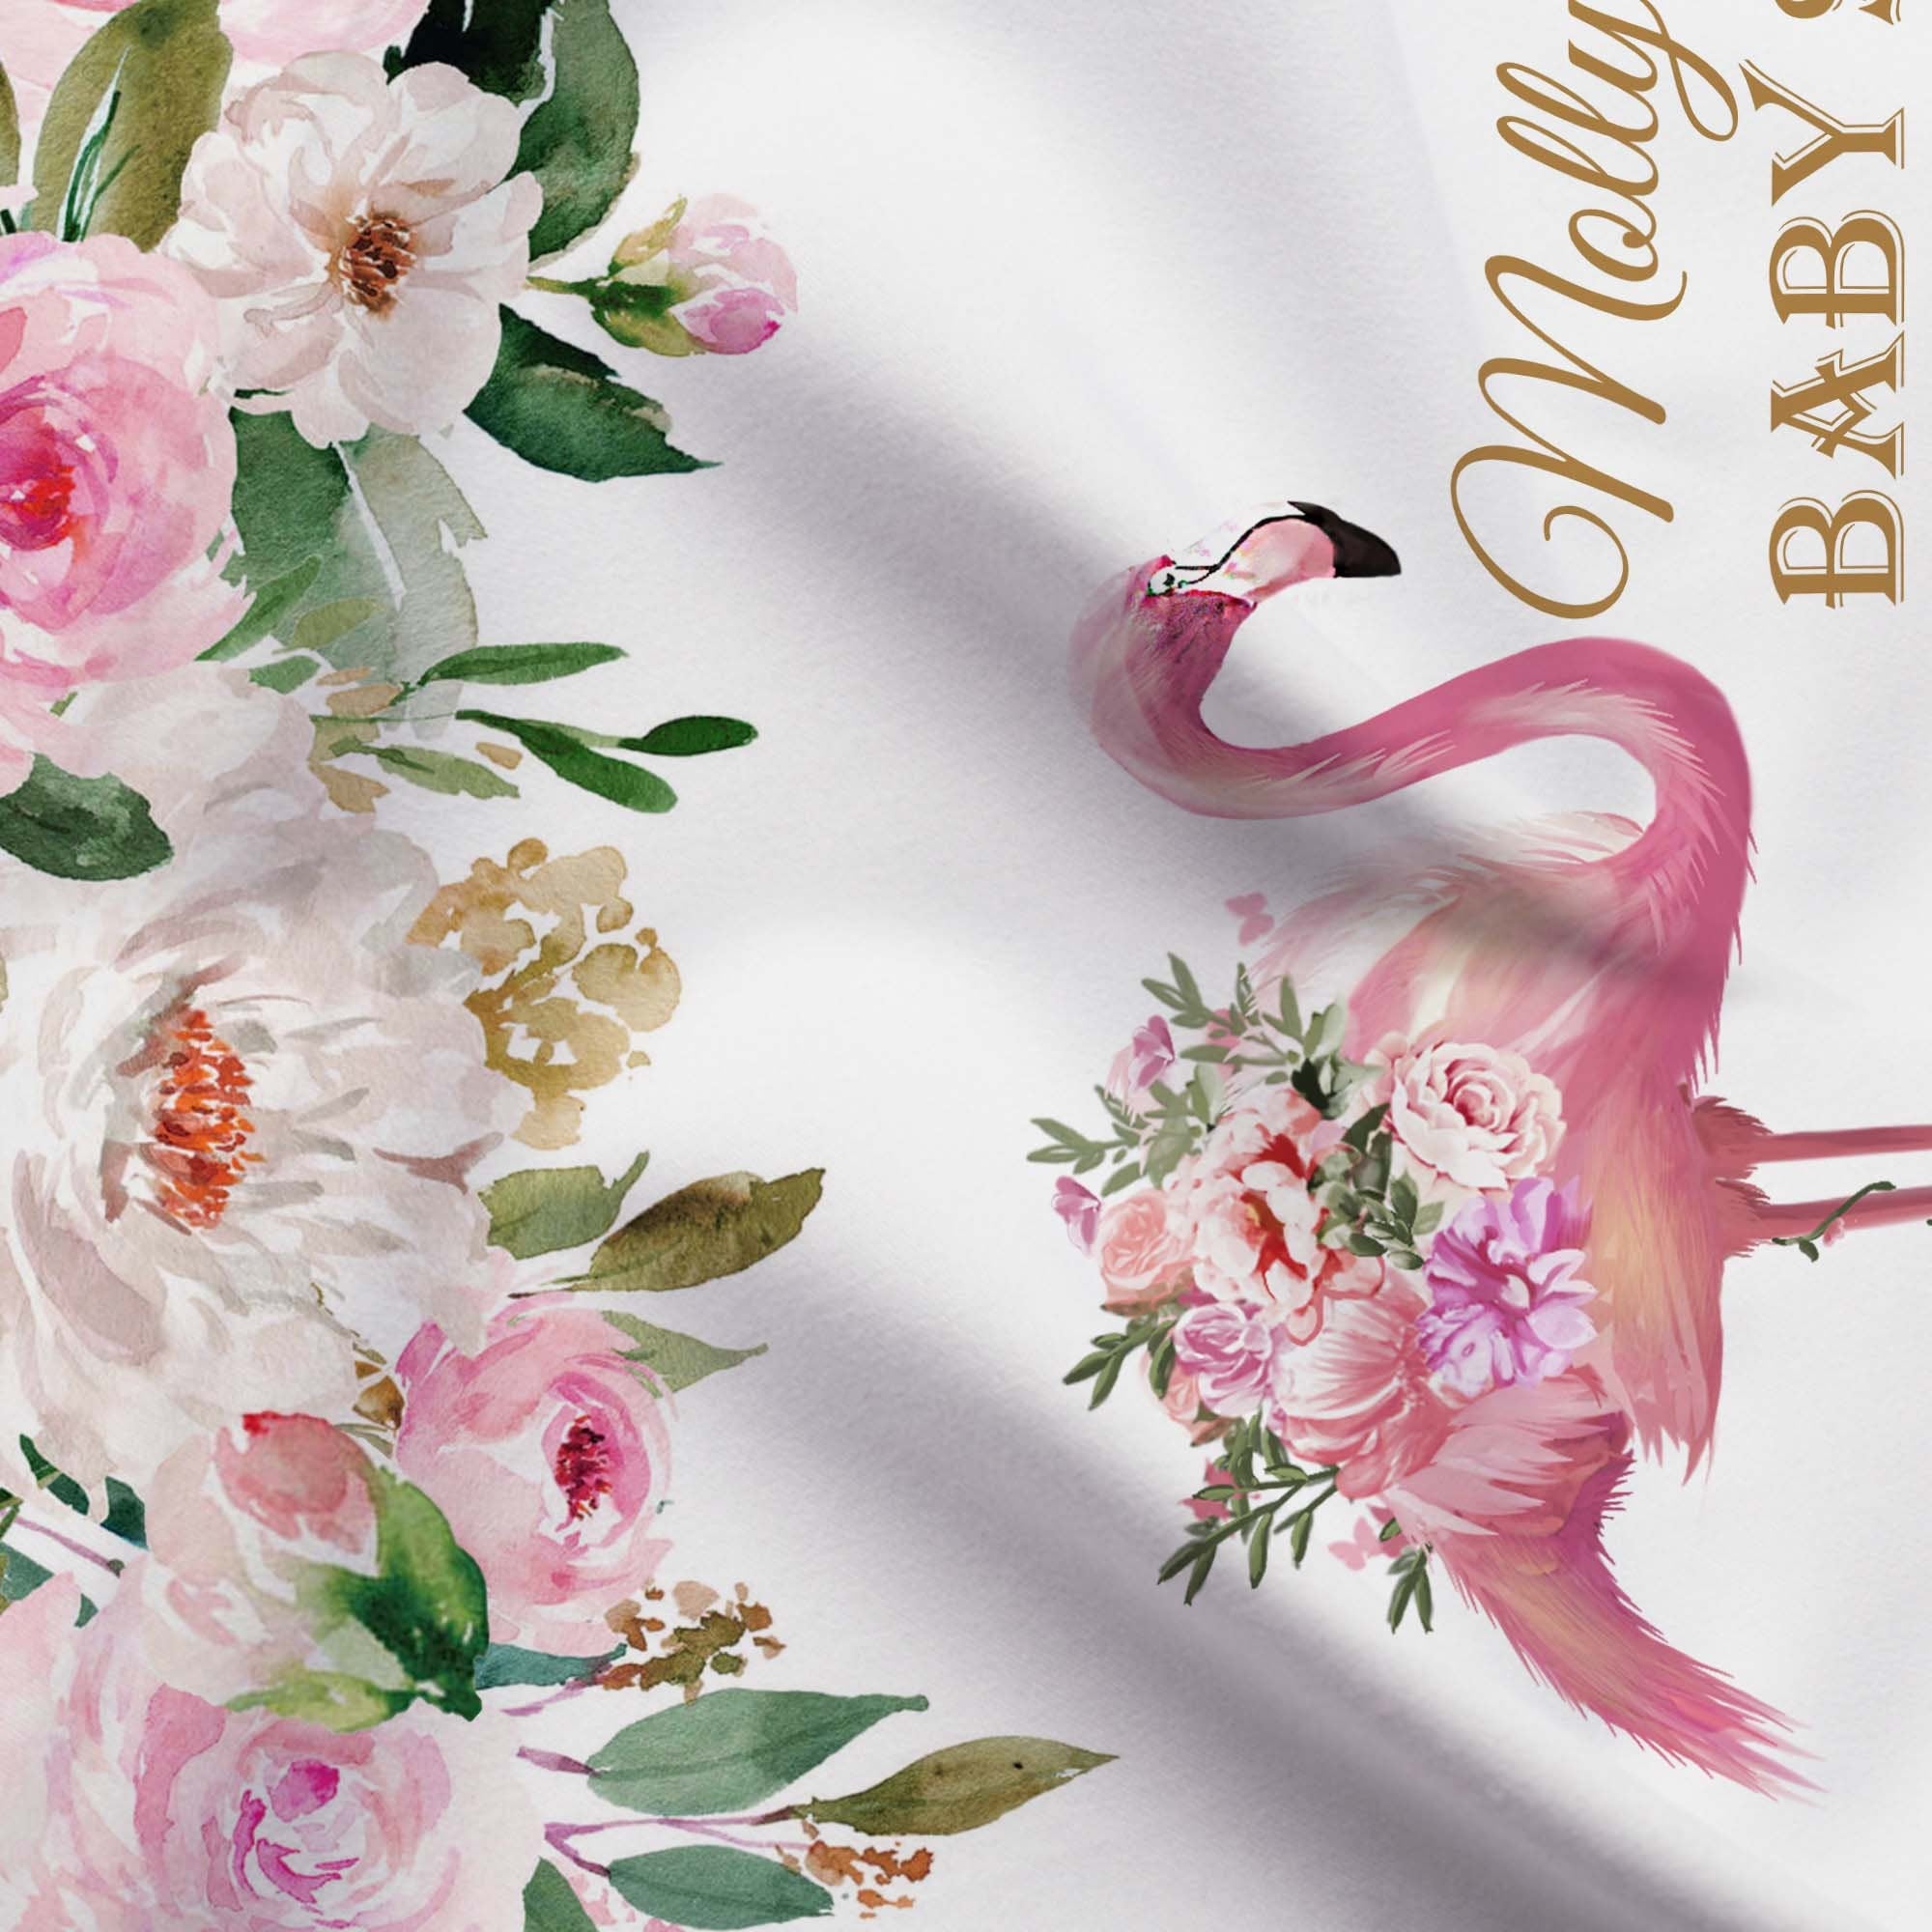 Flamingo Baby Shower, Baby Shower Backdrop, Floral backdrop, Girl Baby Shower Decoration, Floral Flamingo Photo booth Backdrop